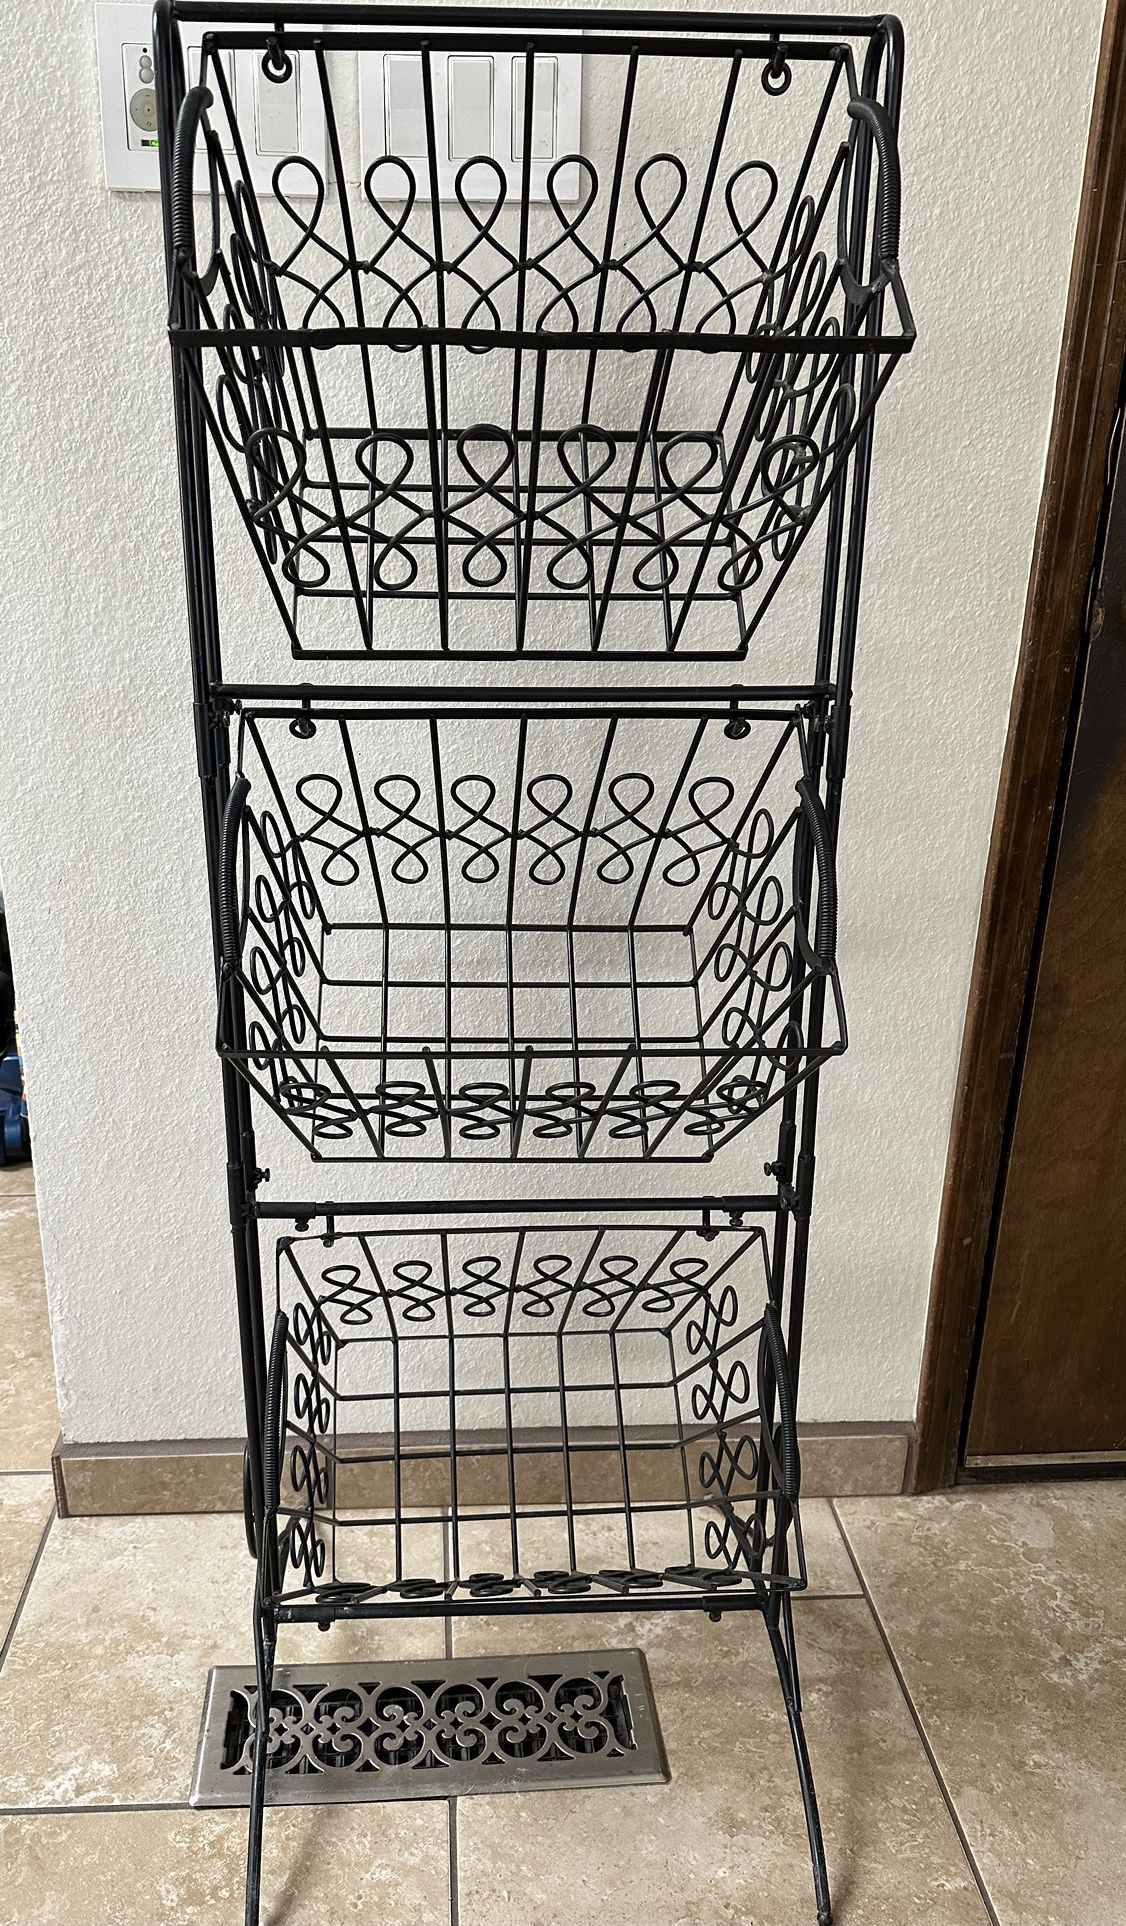 Metal Stand With Baskets